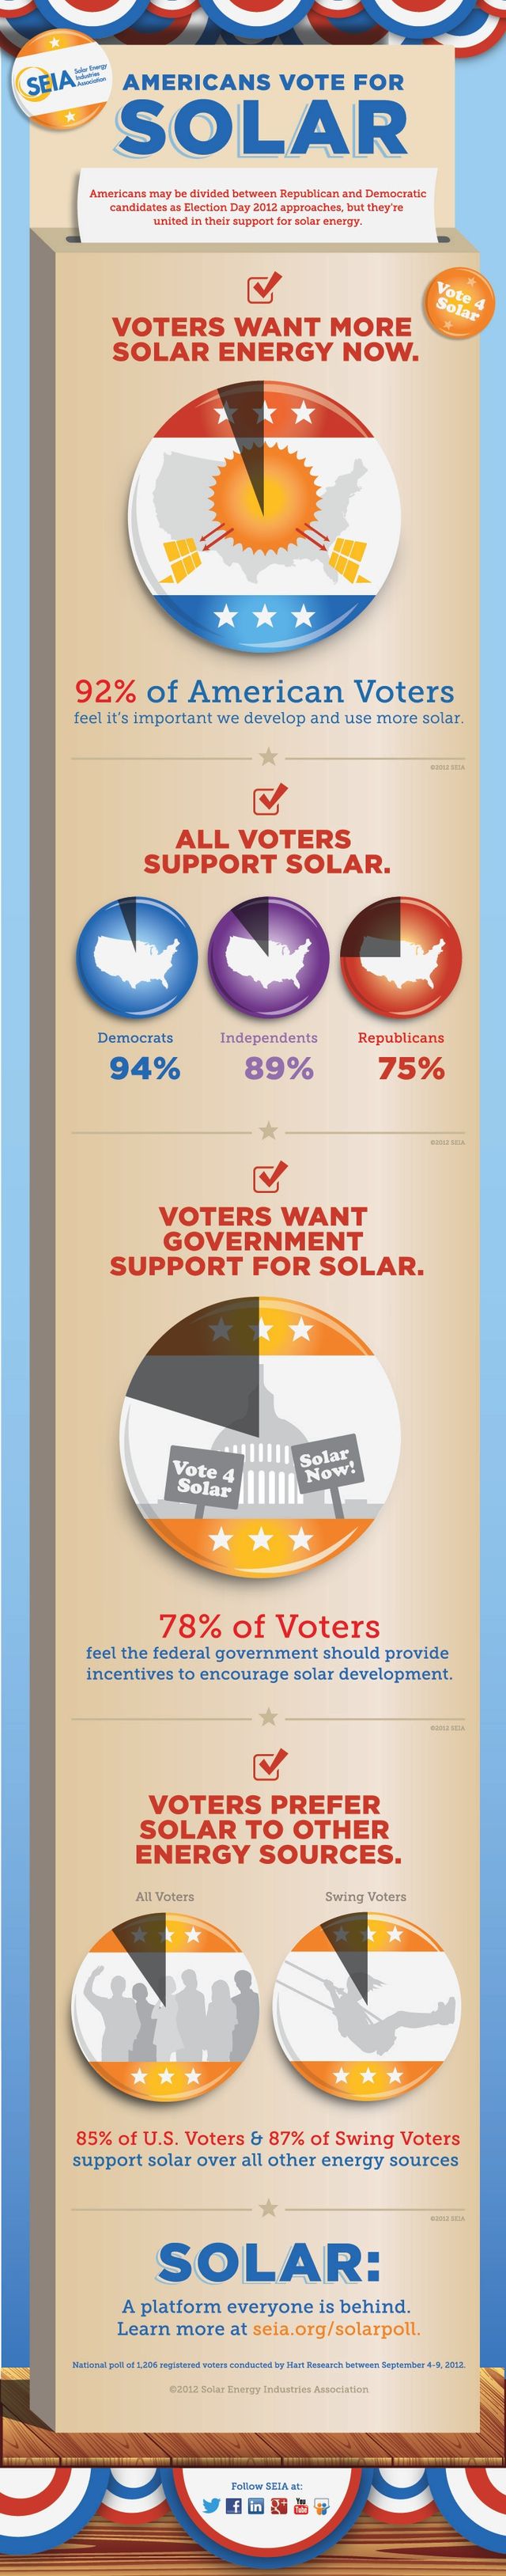 92 percent of American Voters feel it is important we develop and use more solar power